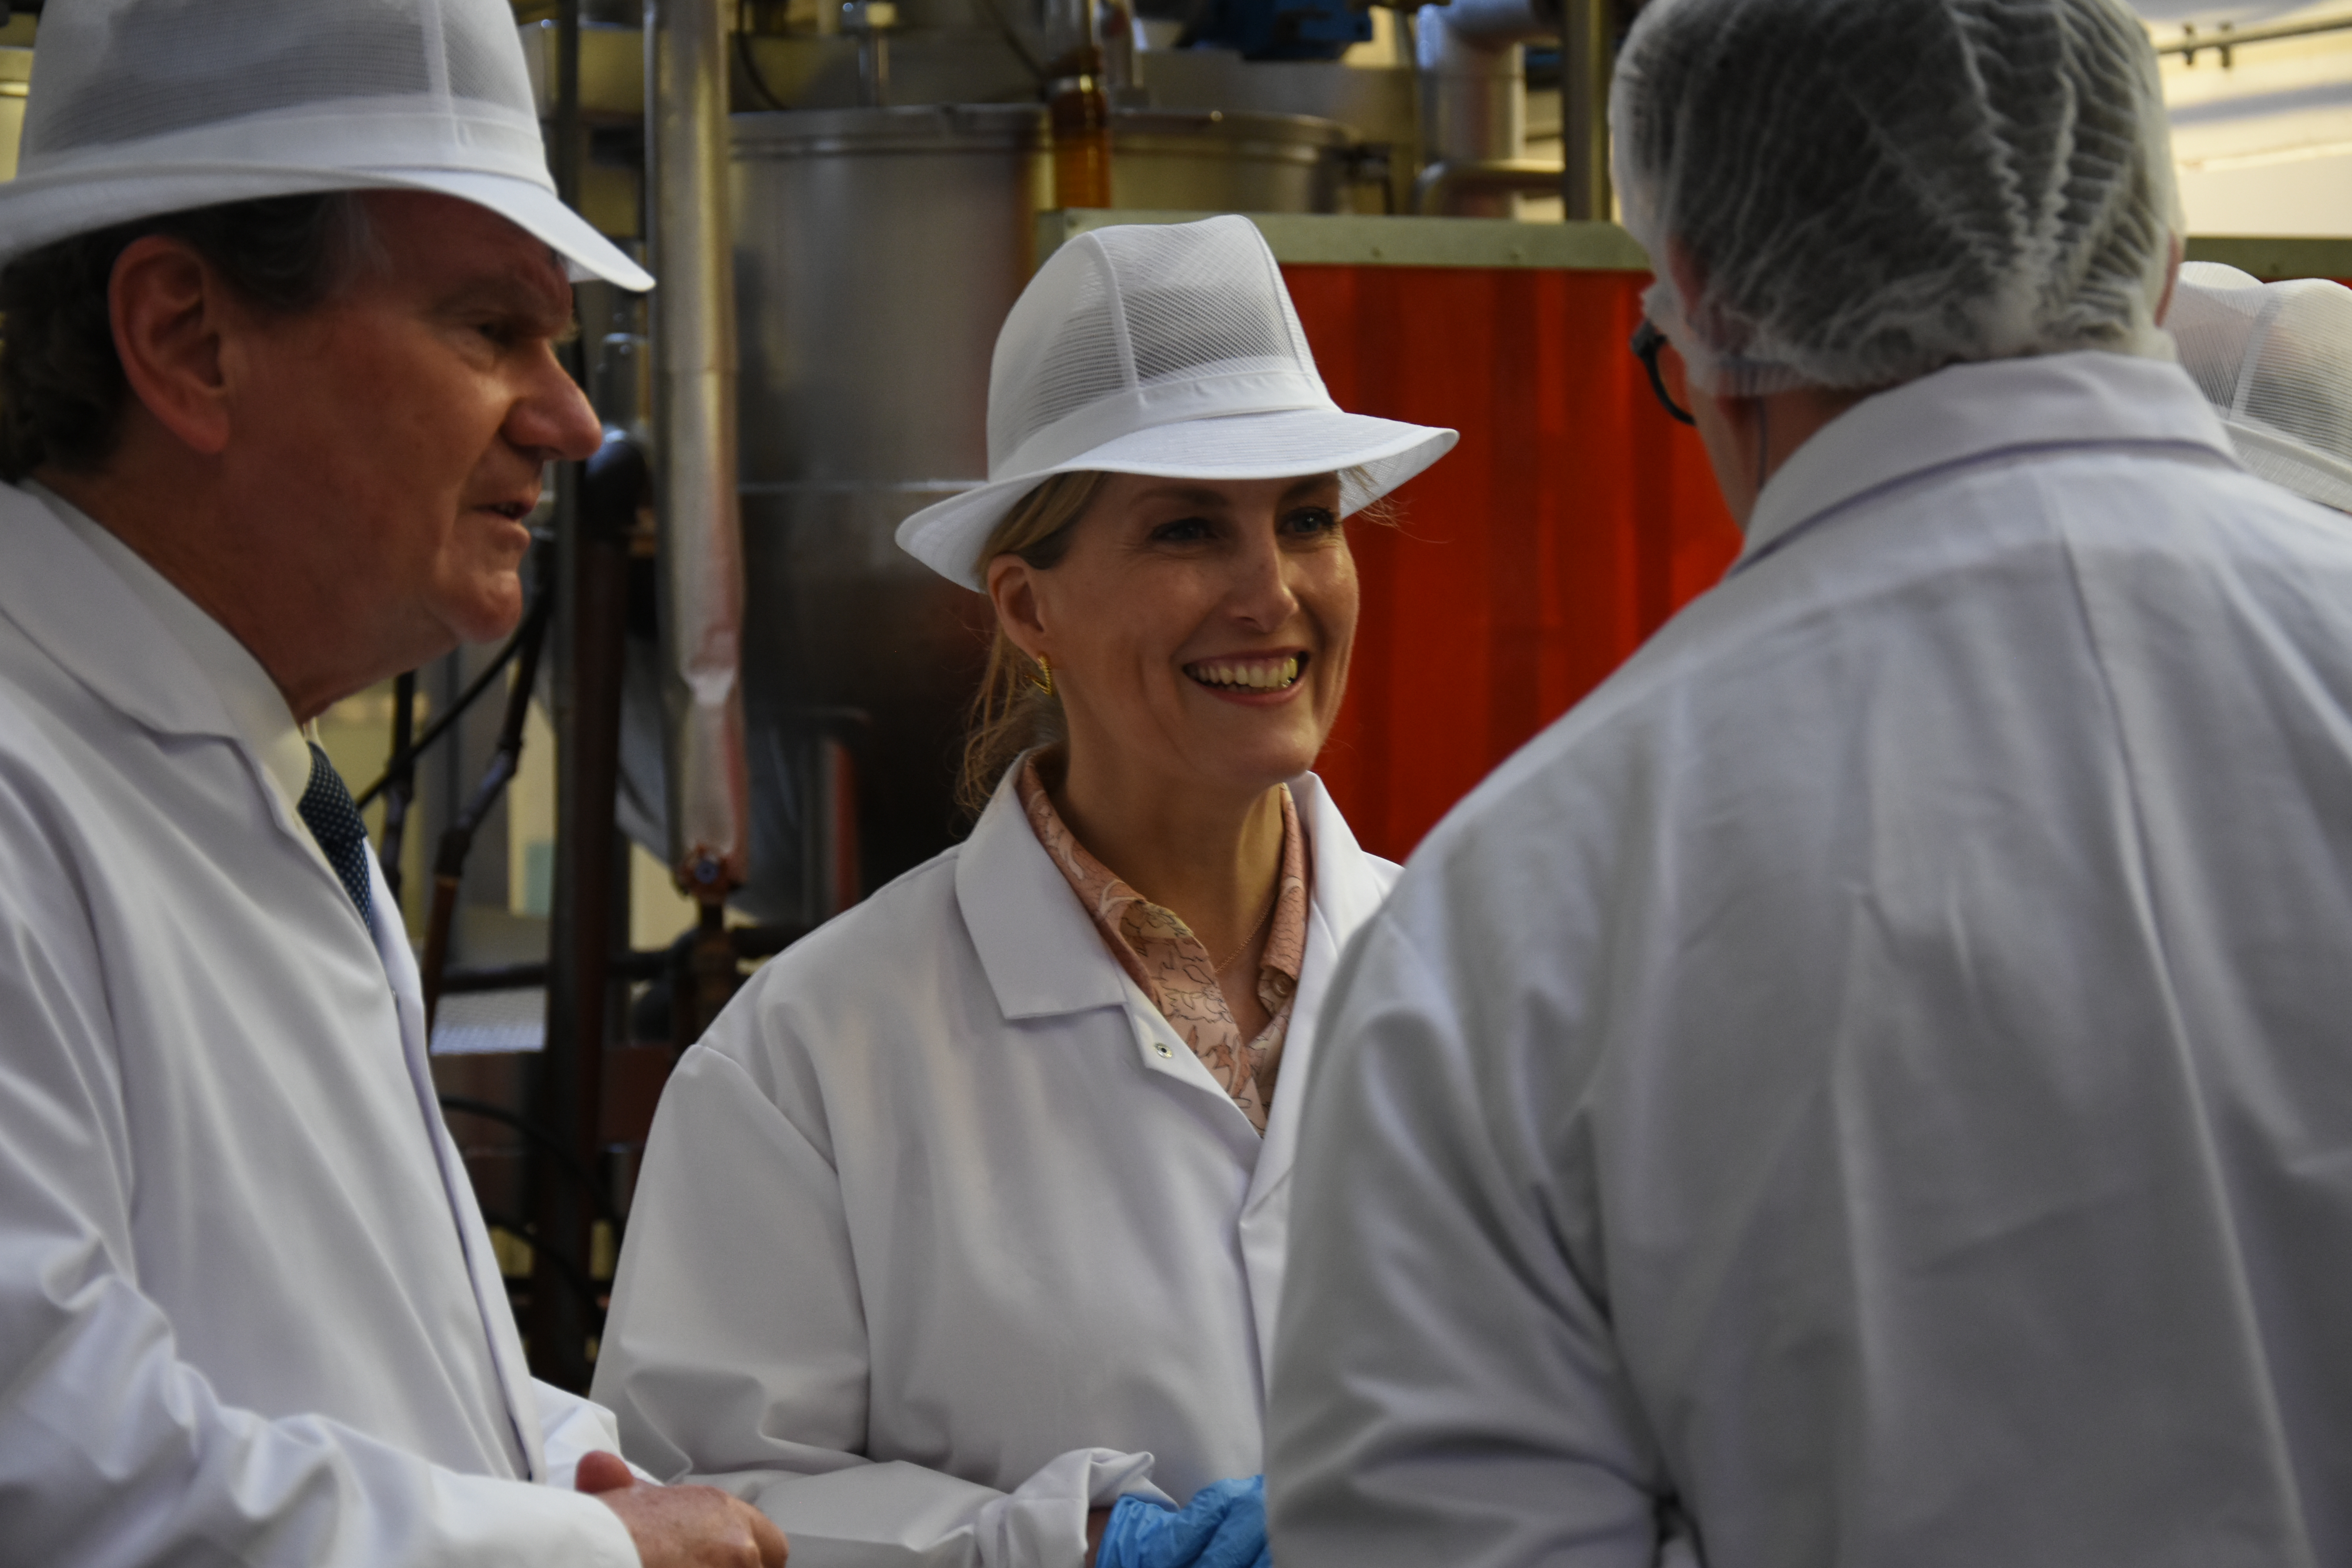 The Earl and Countess of Wessex visit the Tiptree jam factory 